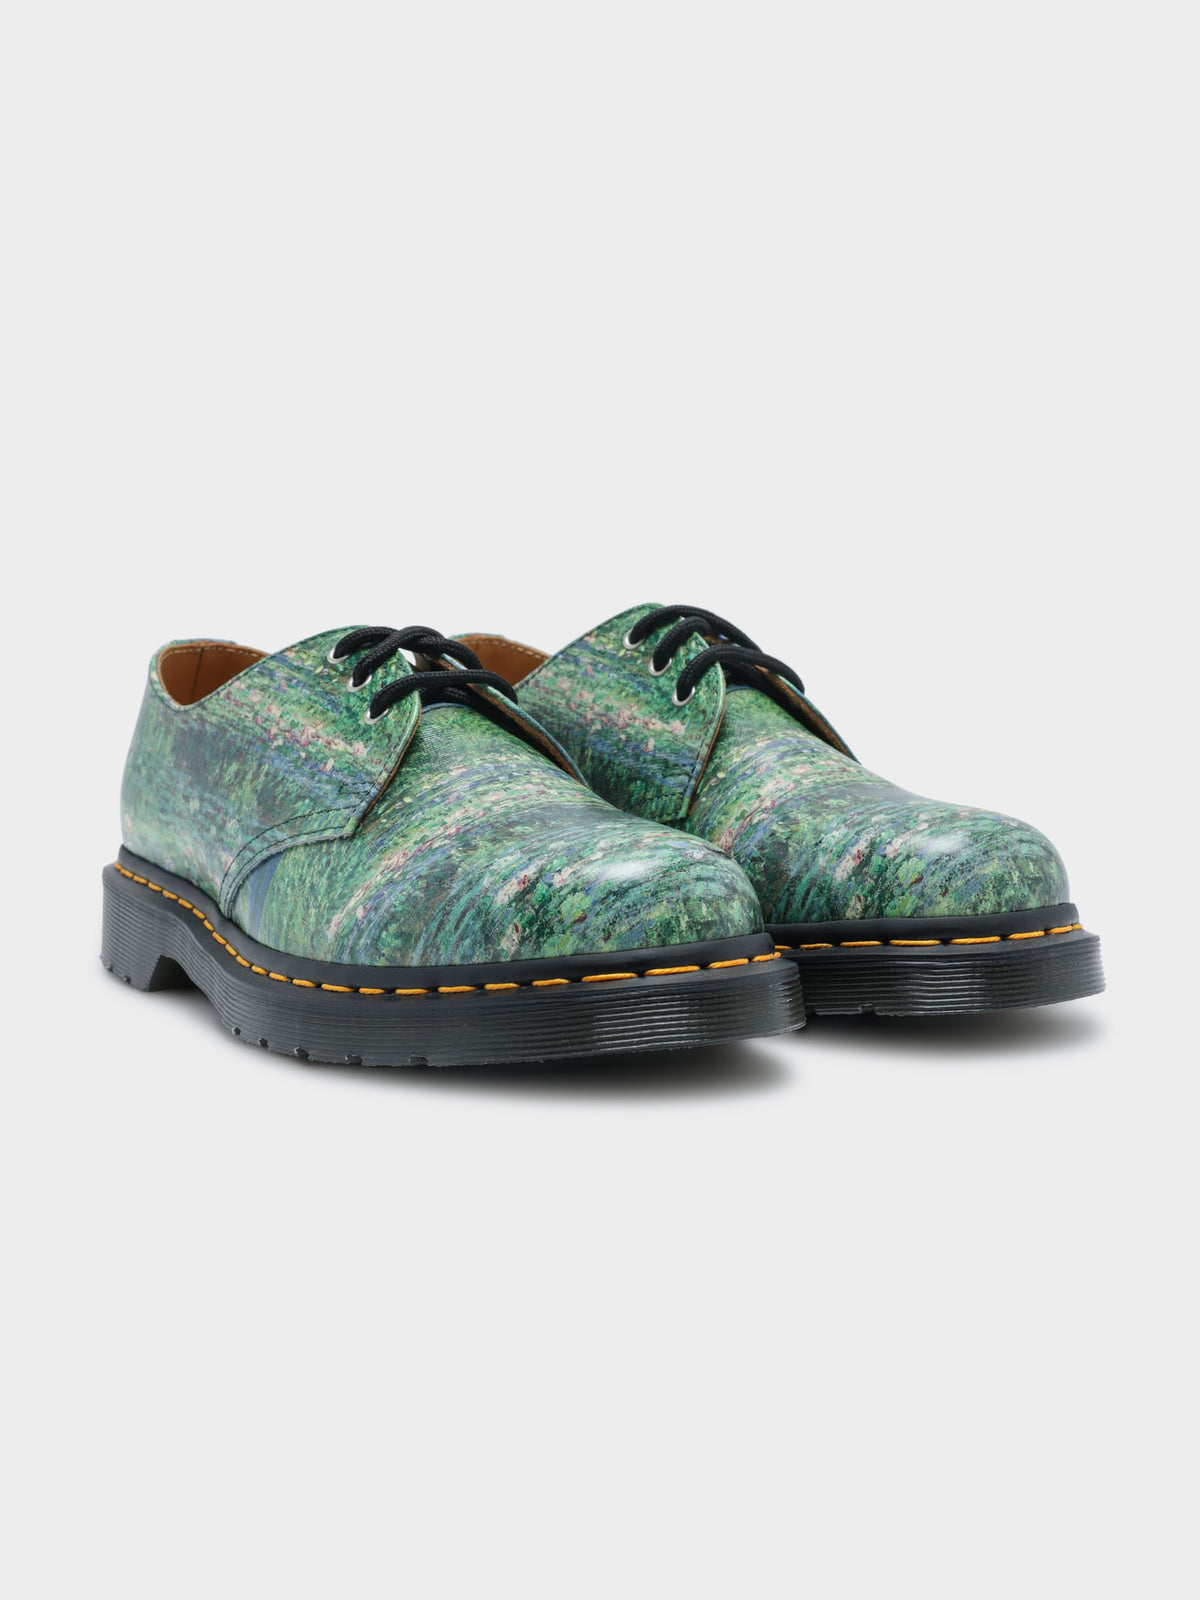 Unisex Dr Martens x National Gallery Monet Lily Pad 1460 Shoes in Green